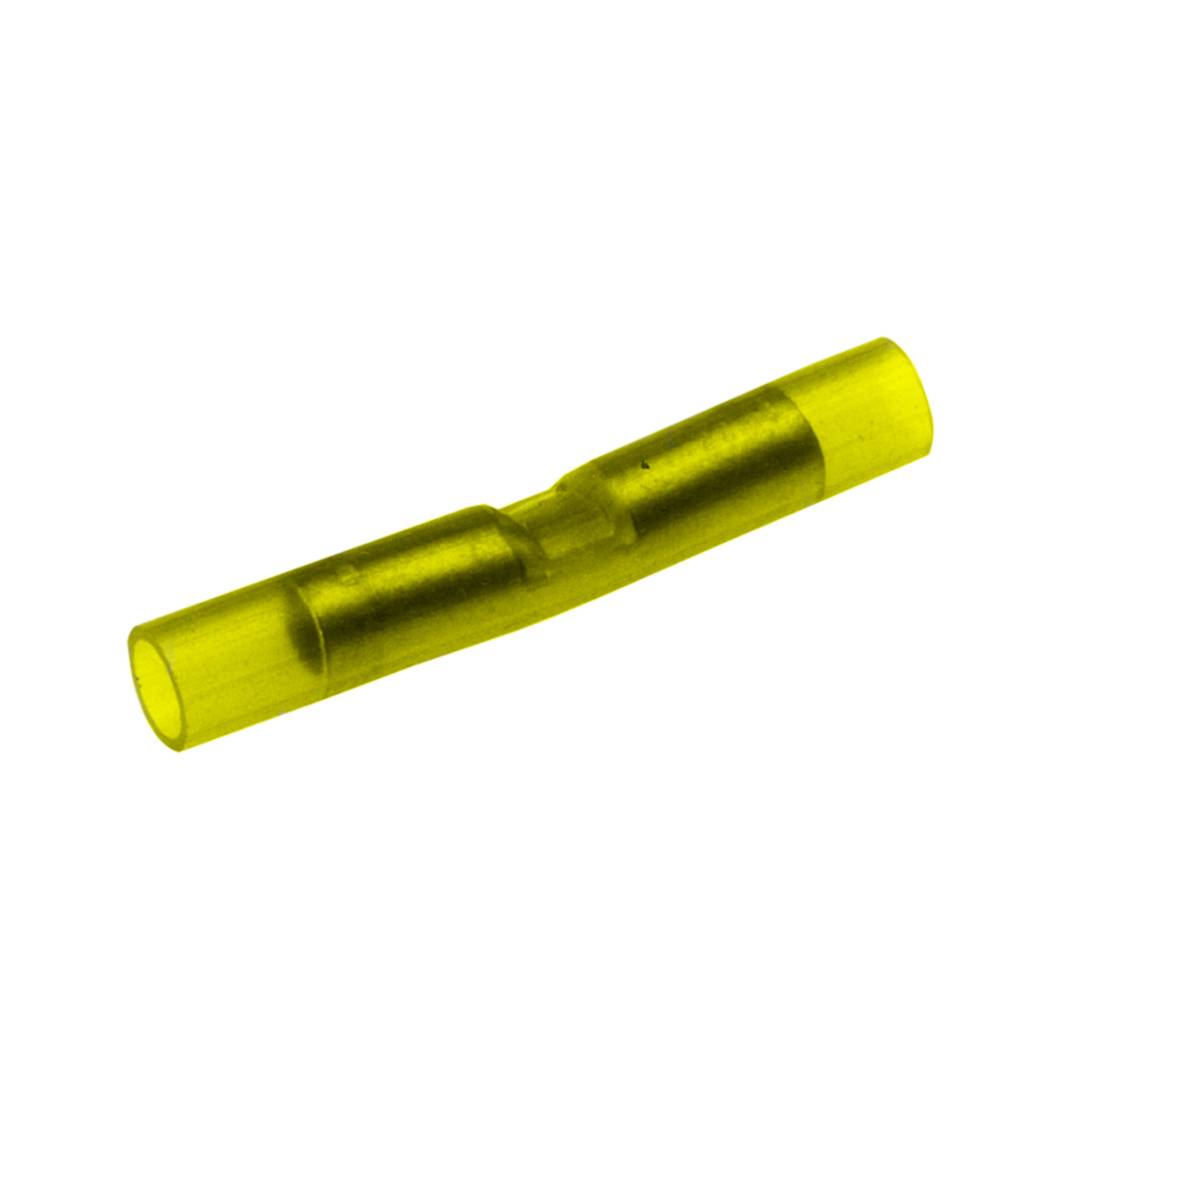 BURNDY® INSULINK™ SN10 Type SN Splice Connector, 12 to 10 AWG Conductor, 1.64 in L, Butted Barrel, Copper, Yellow